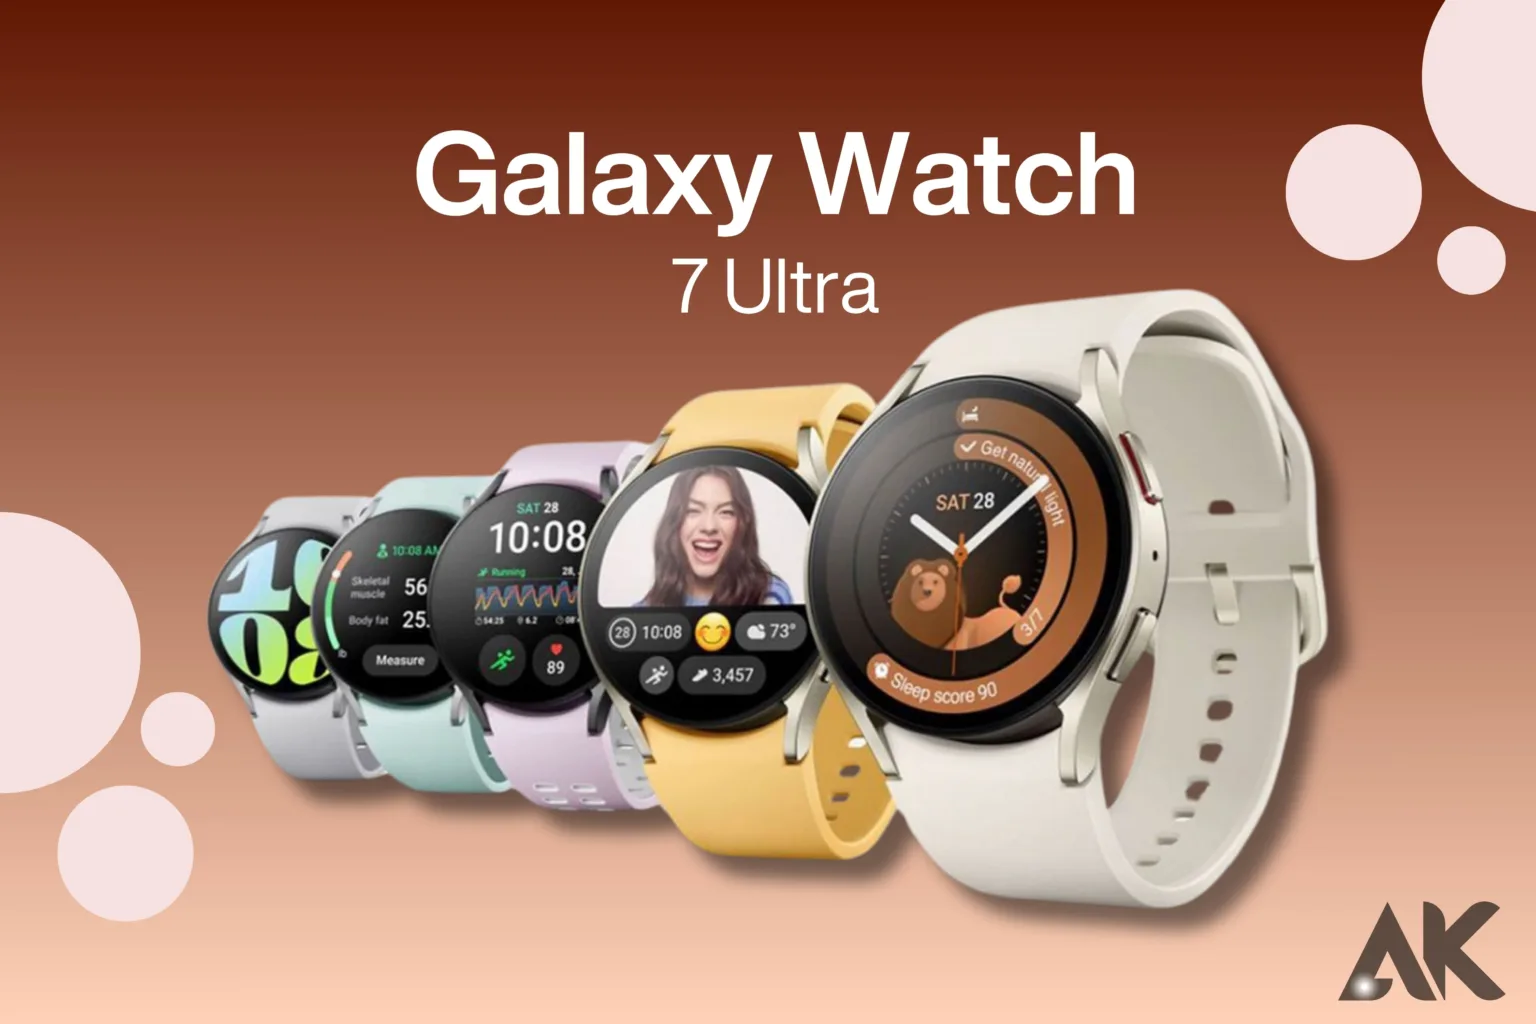 Galaxy Watch 7 Ultra color options